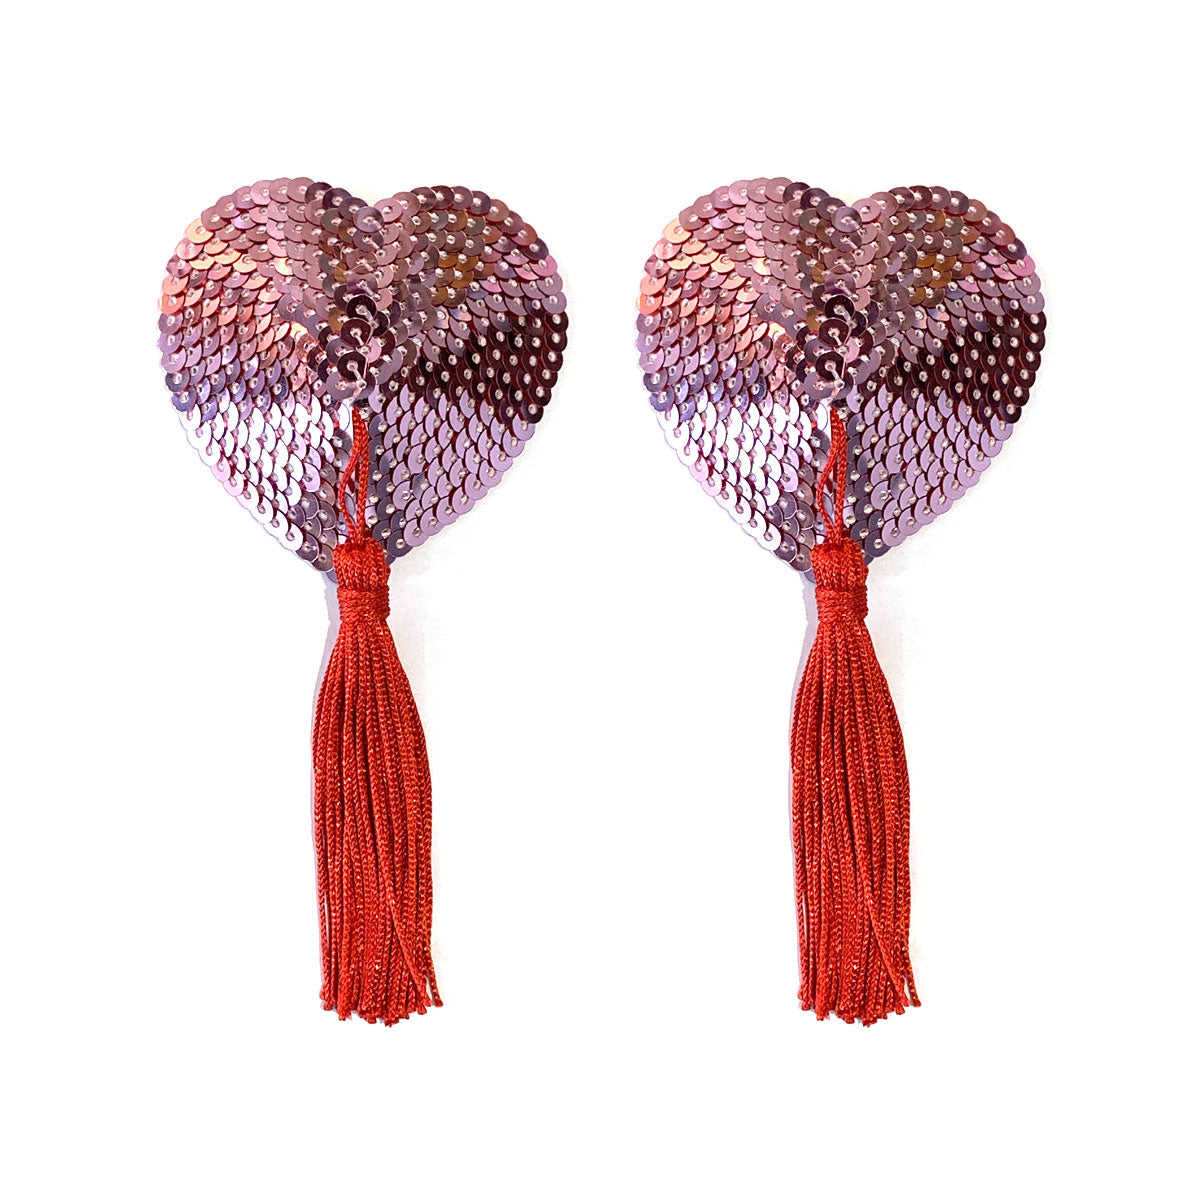 COSMOPOLITAN Pink Sequin Heart Nipple Covers with Tassels, Pasties (2pcs) Body Jewelry for Lingerie, Burlesque, Raves, Festivals